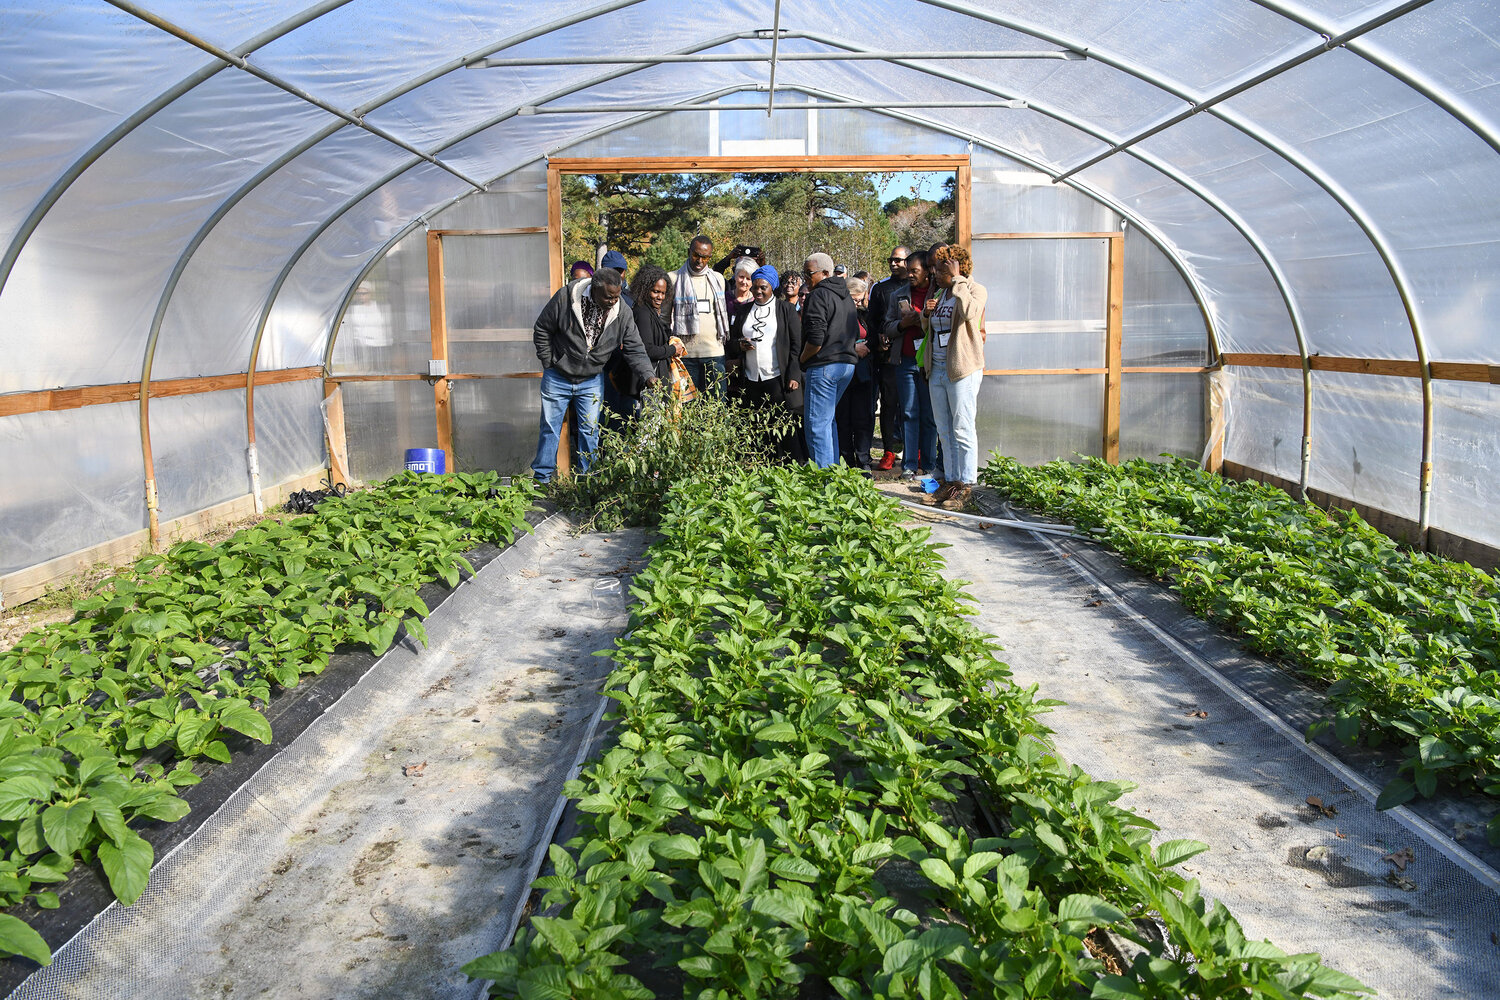 Participants in the Small Farms Conference hosted by UMES Nov. 2-4 visit Tallawah Farms on Stewart Neck Road on the second day.